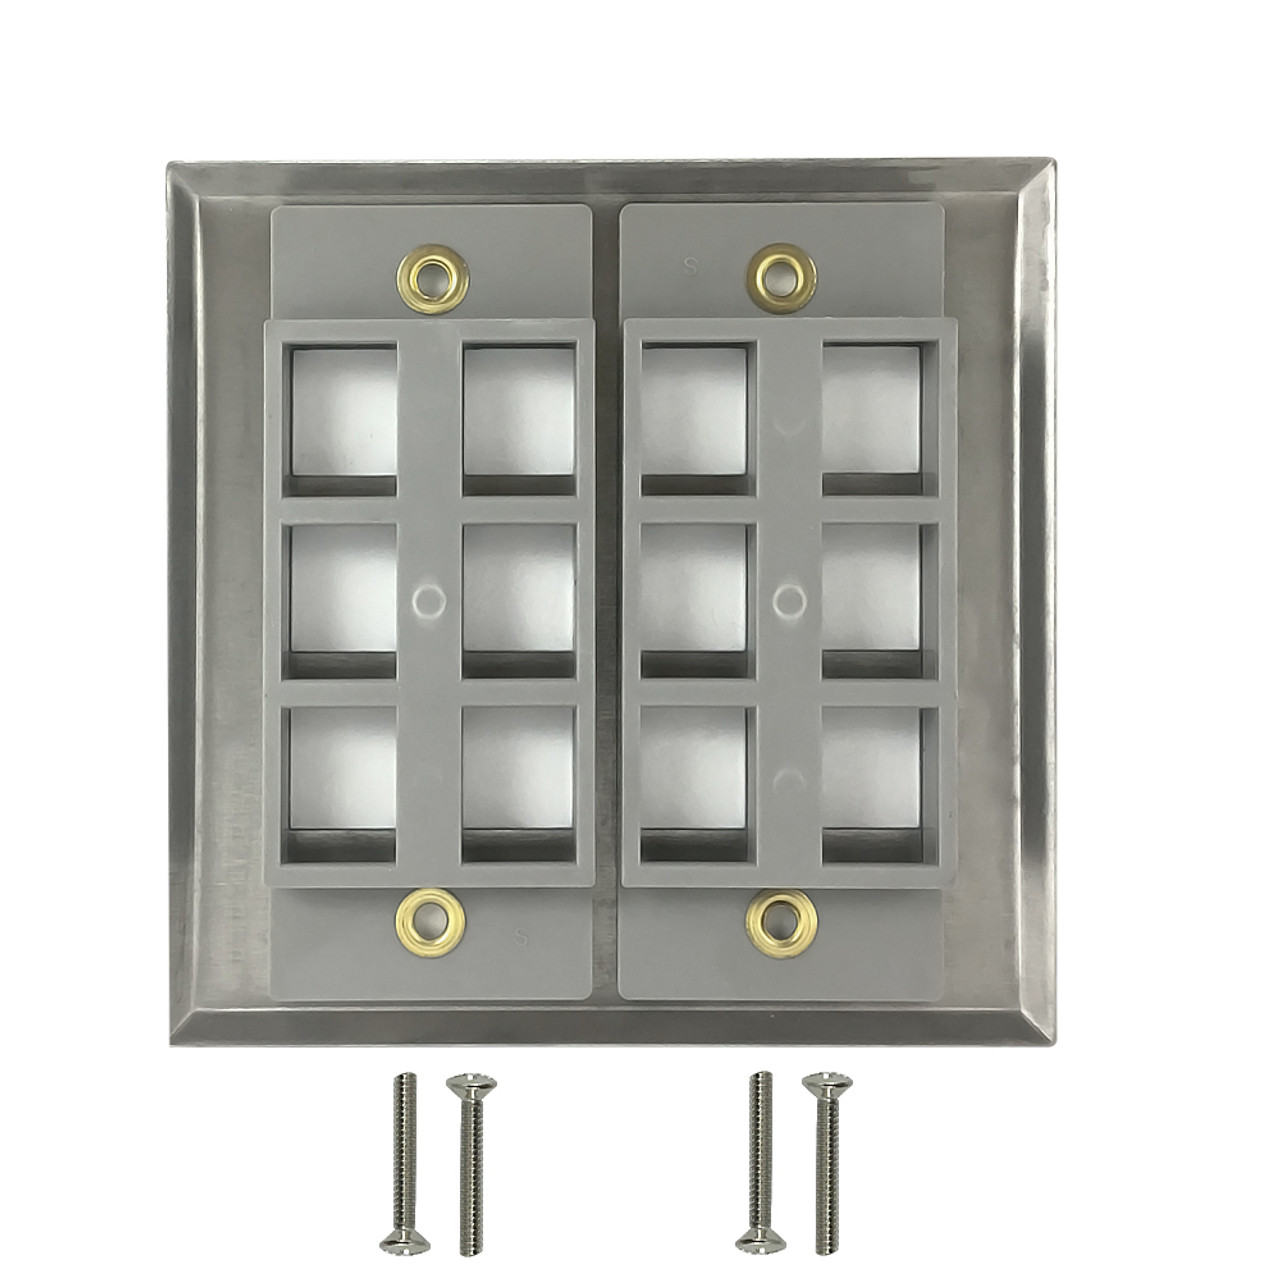 Double Gang 12 Port Keystone Stainless Steel Wall Plate1